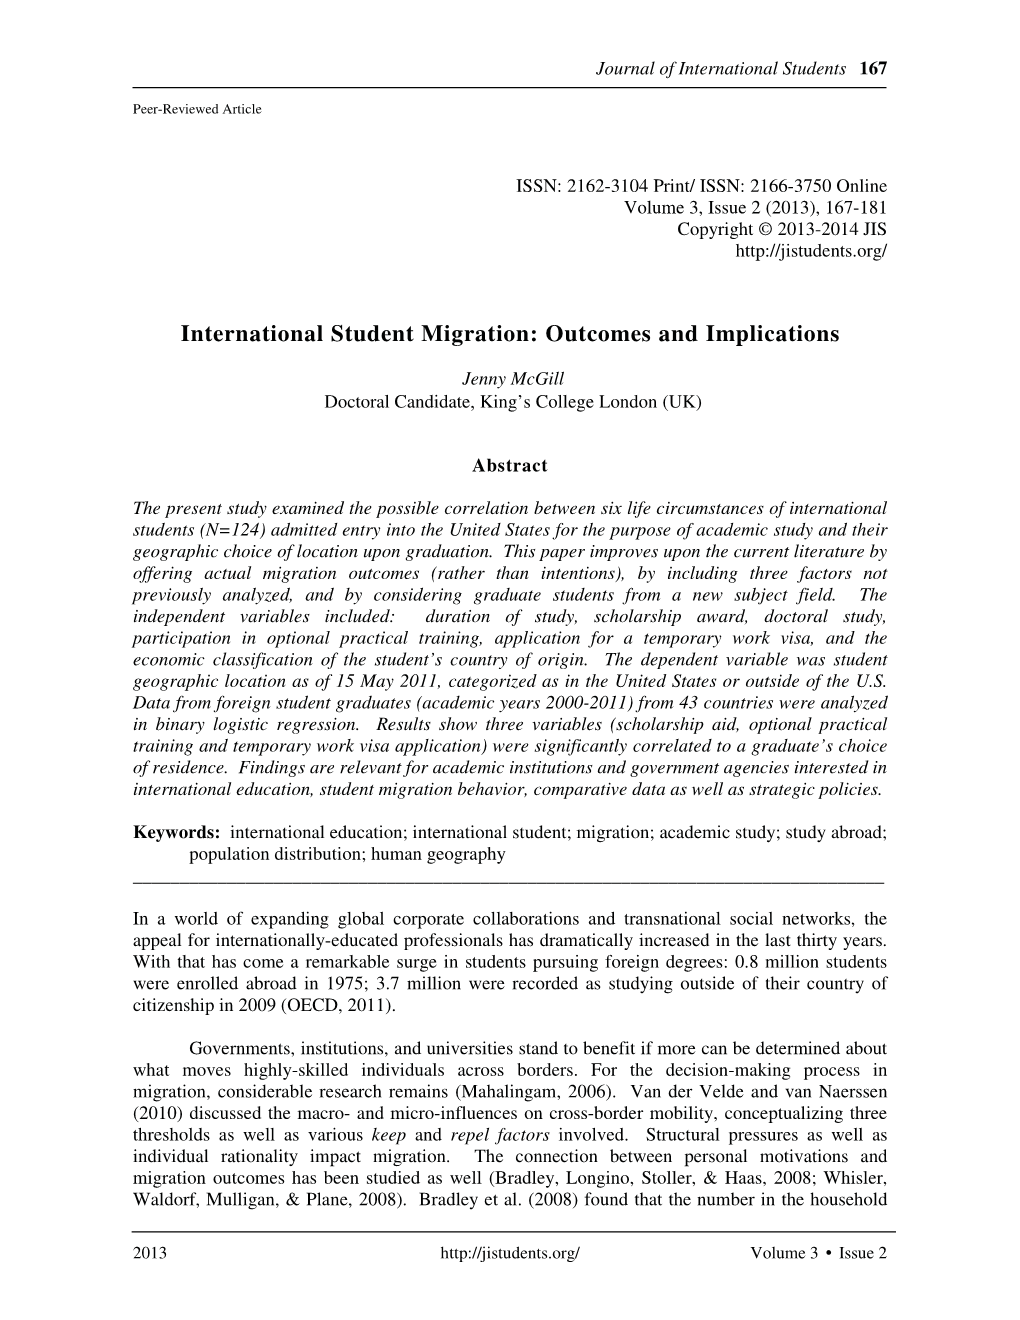 International Student Migration: Outcomes and Implications